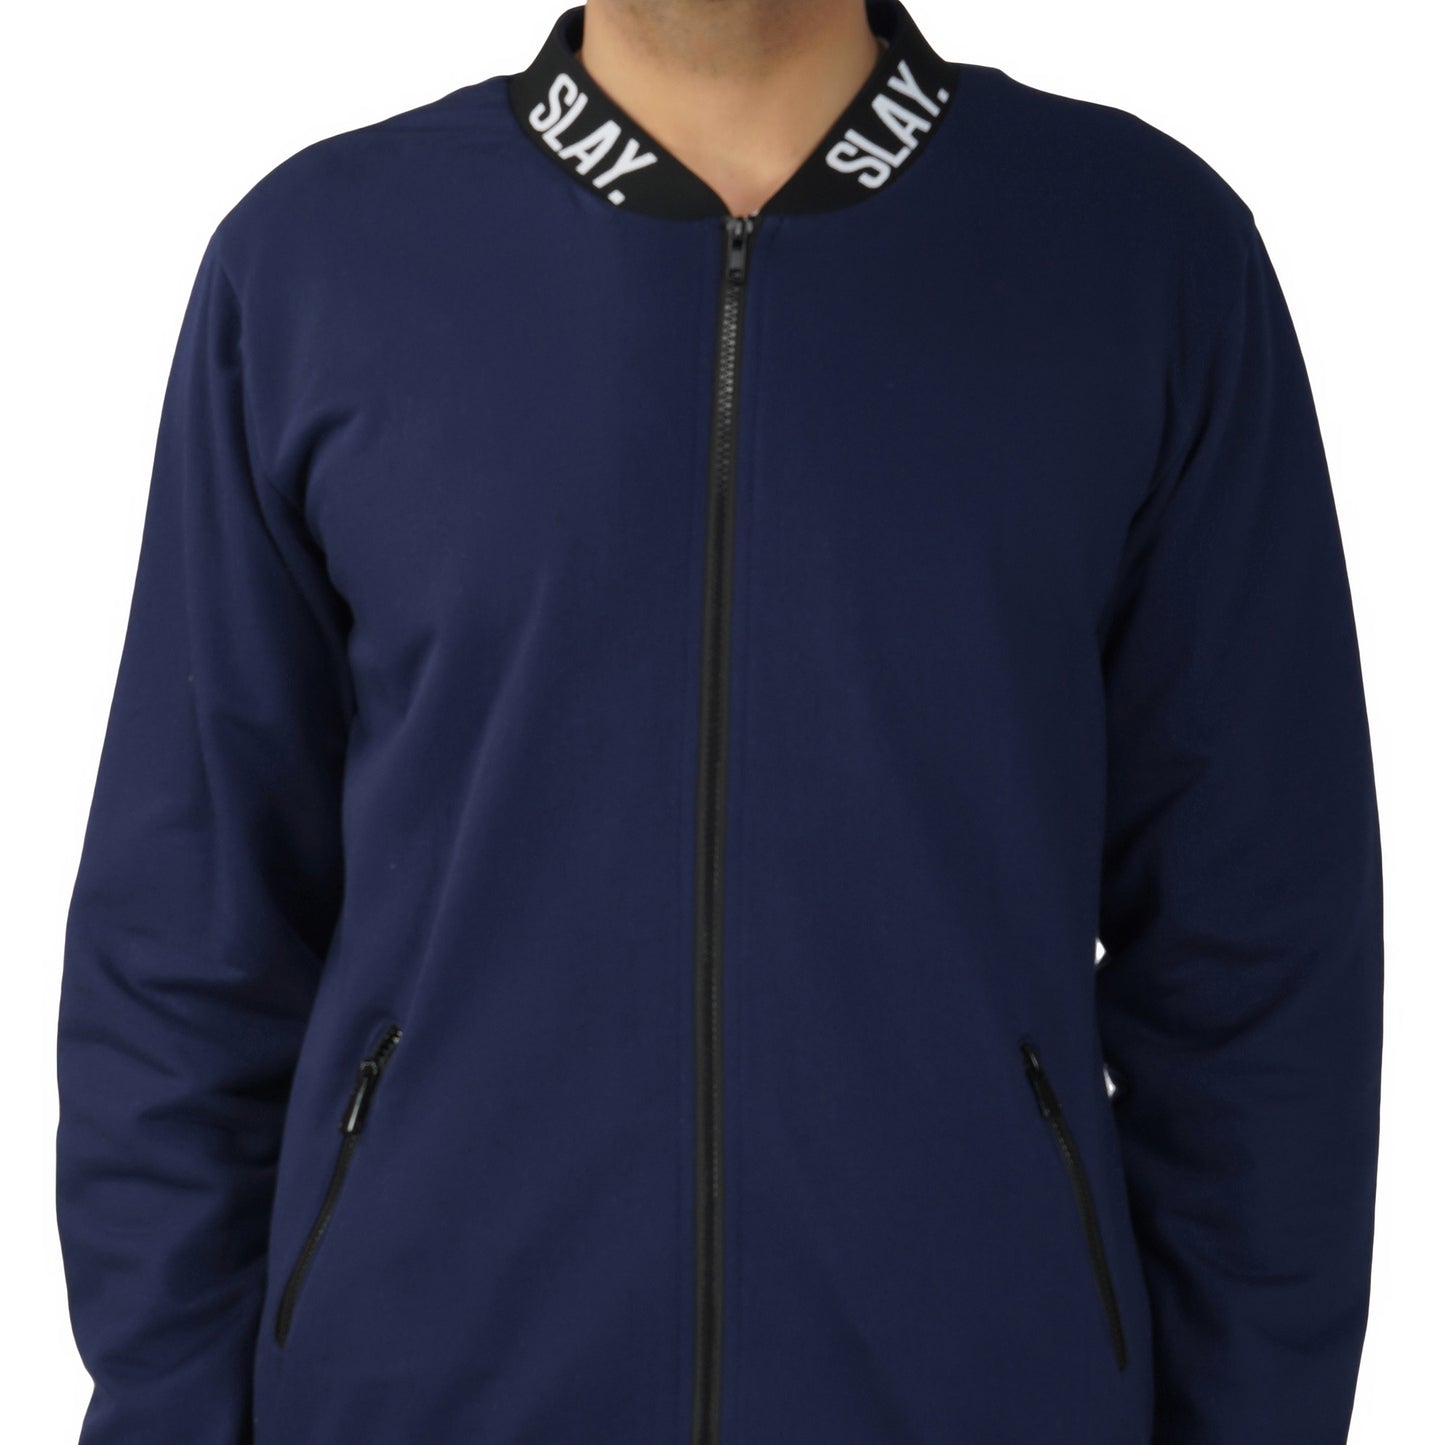 SLAY. Classic Men's Limited Edition Navy Blue Tracksuit